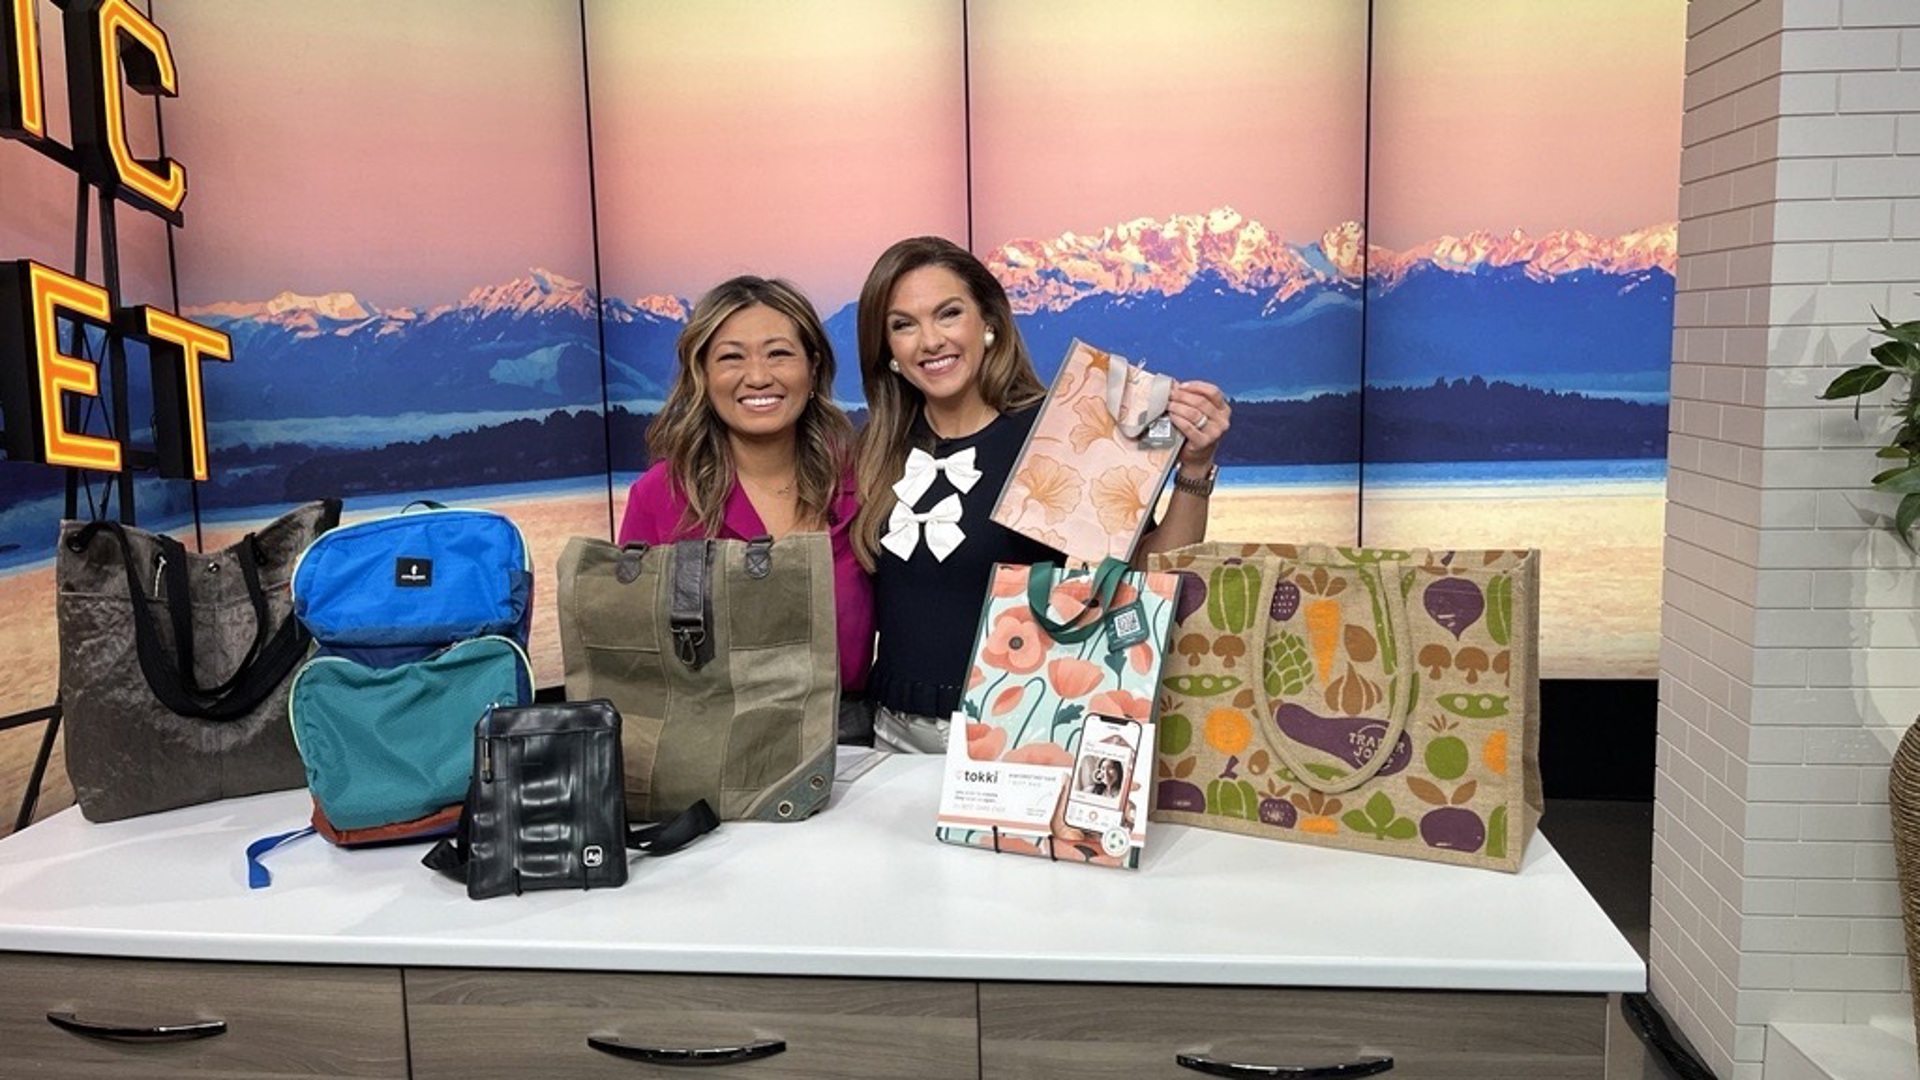 Owner of TOKKI, Jane Park, shares her favorite bags including local shops making cool sustainable styles. #newdaynw